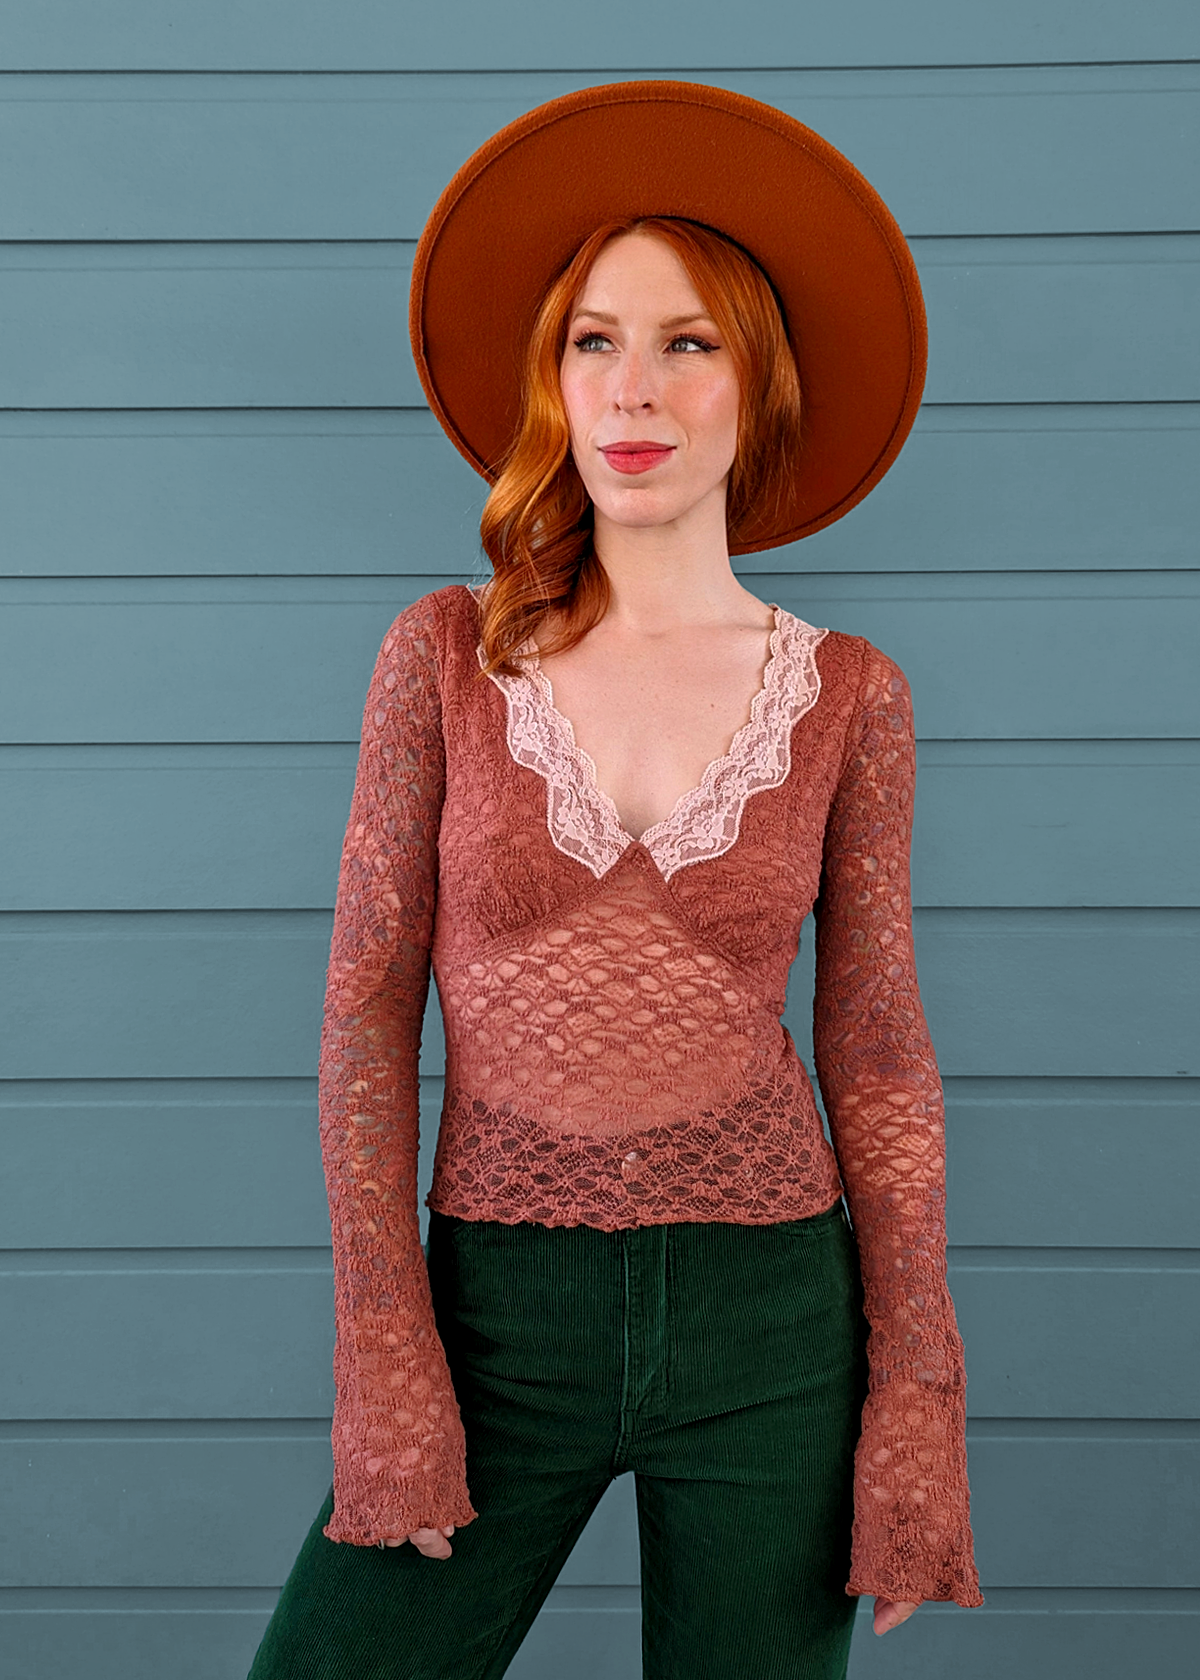 90s inspired withered rose netted lace top with deep v neckline accented with pale pink lace trim. Long fluted sleeves. Fully lined at bust, unlined through the rest. By Motel Rocks.